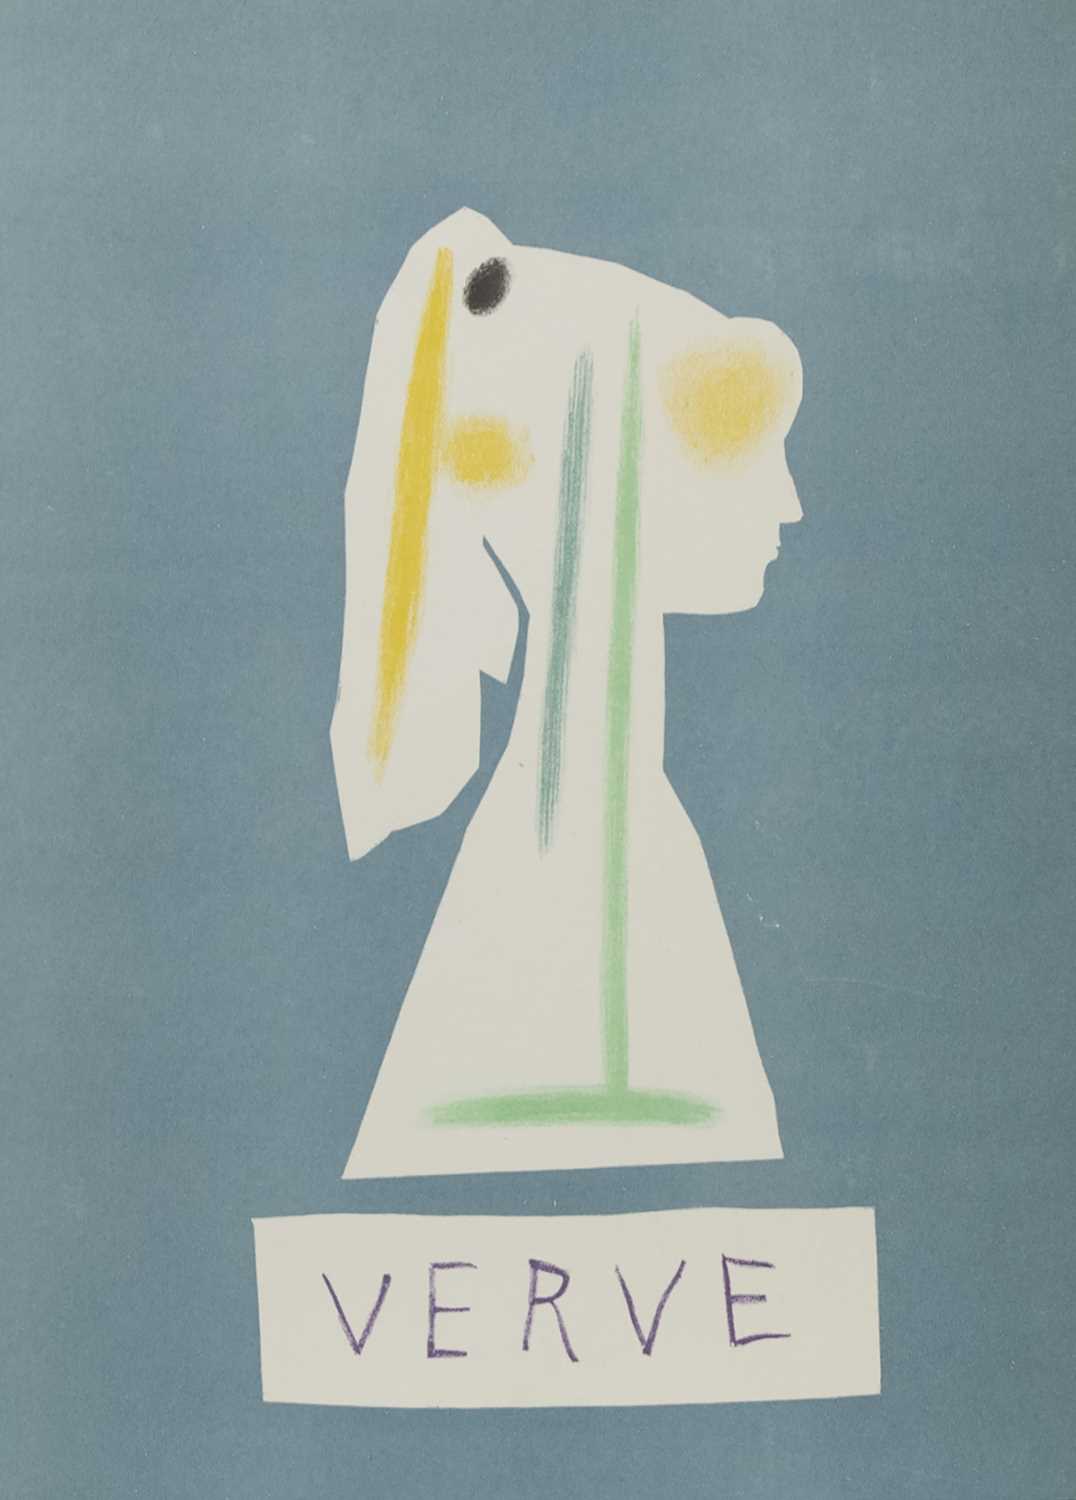 Lot 468 - VERVE BOOK, FRONT COVER, AFTER PABLO PICASSO